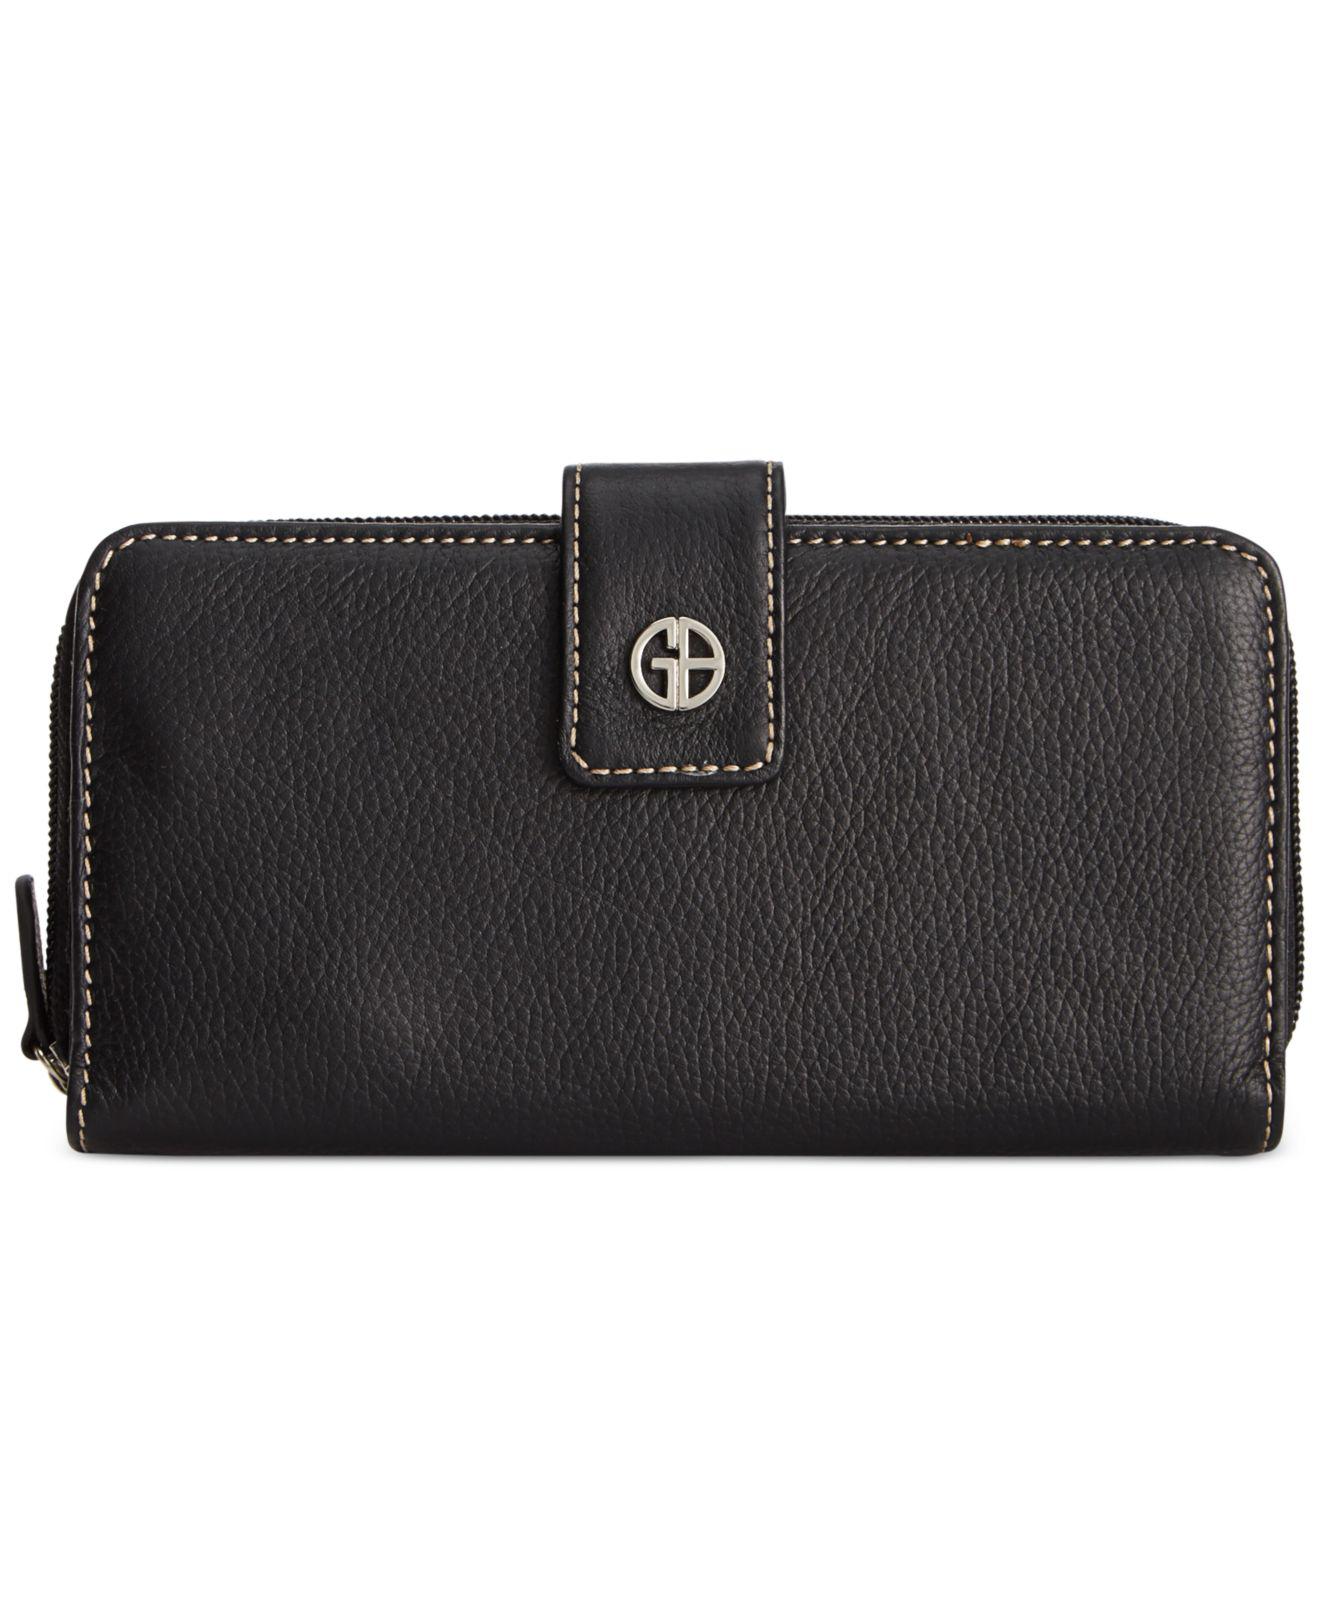 Giani Bernini Softy Leather All-in-one Wallet in Black/Silver (Black ...